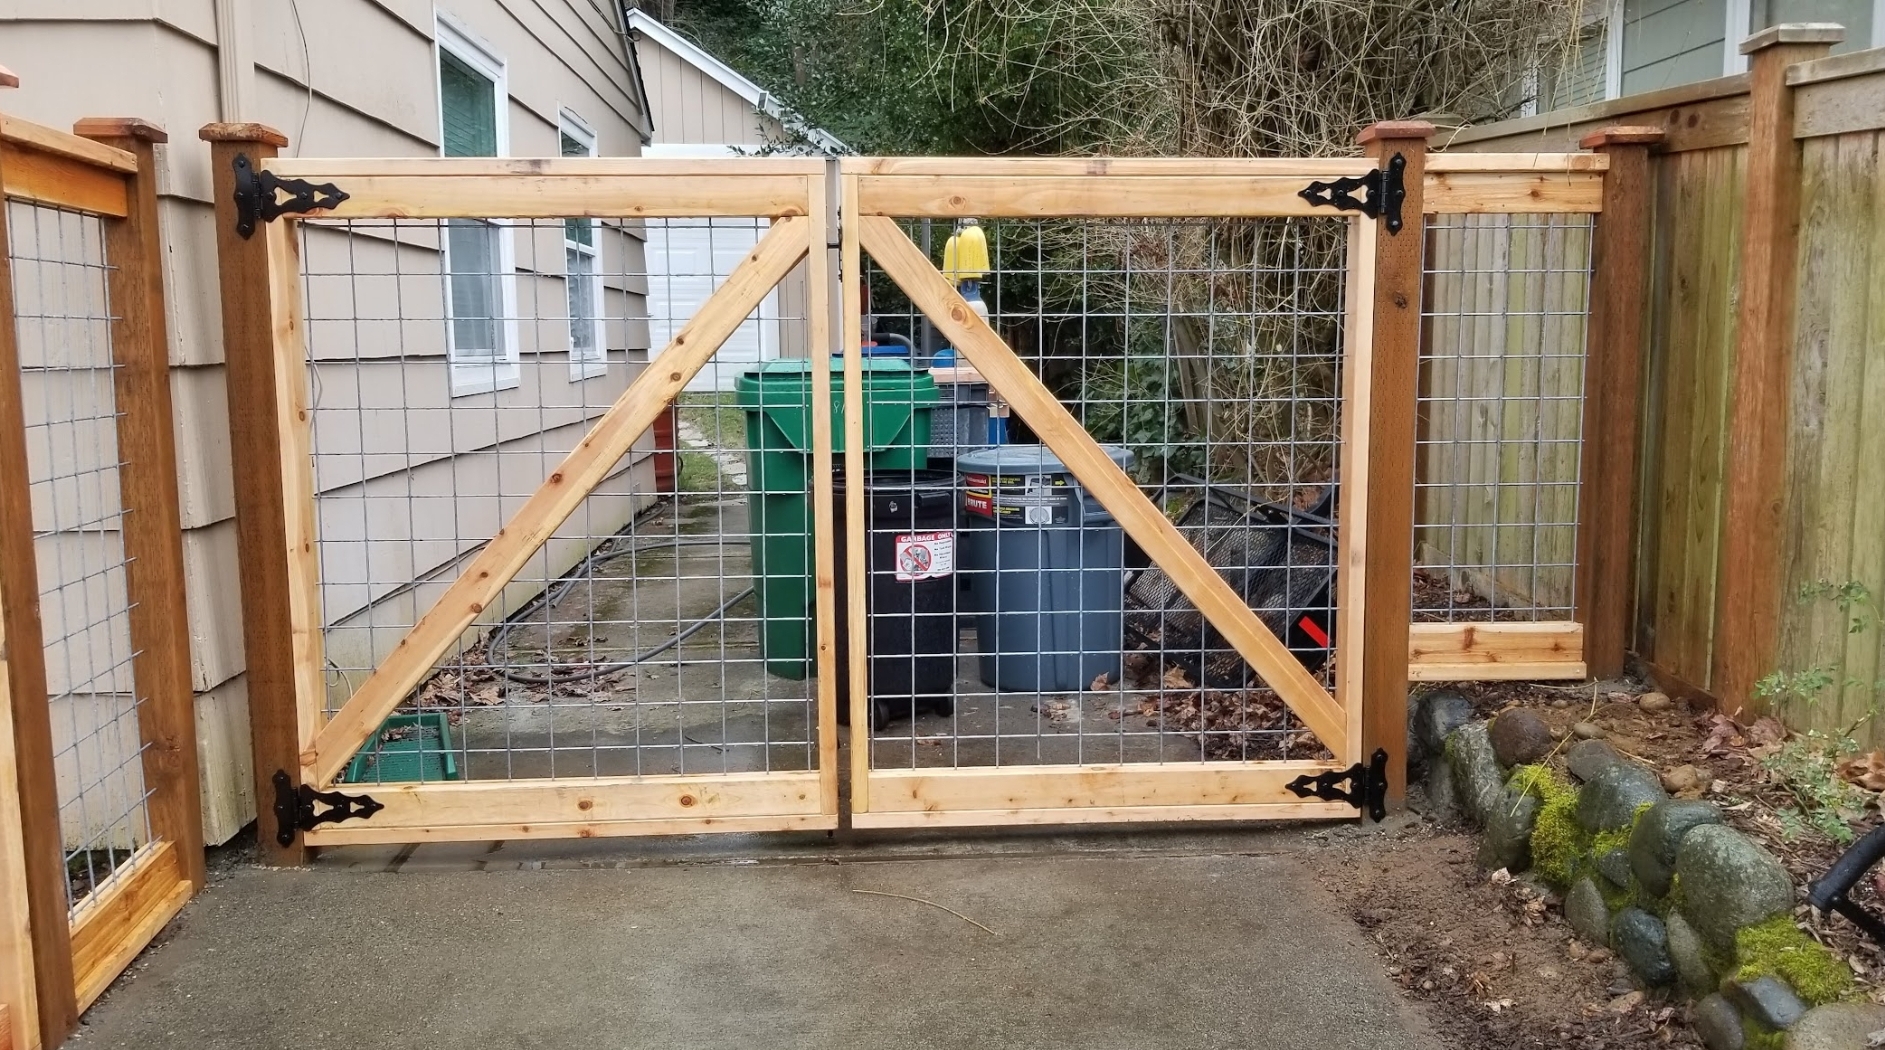 5'FT DOUBLE PANEL HOG-WIRE GATE.